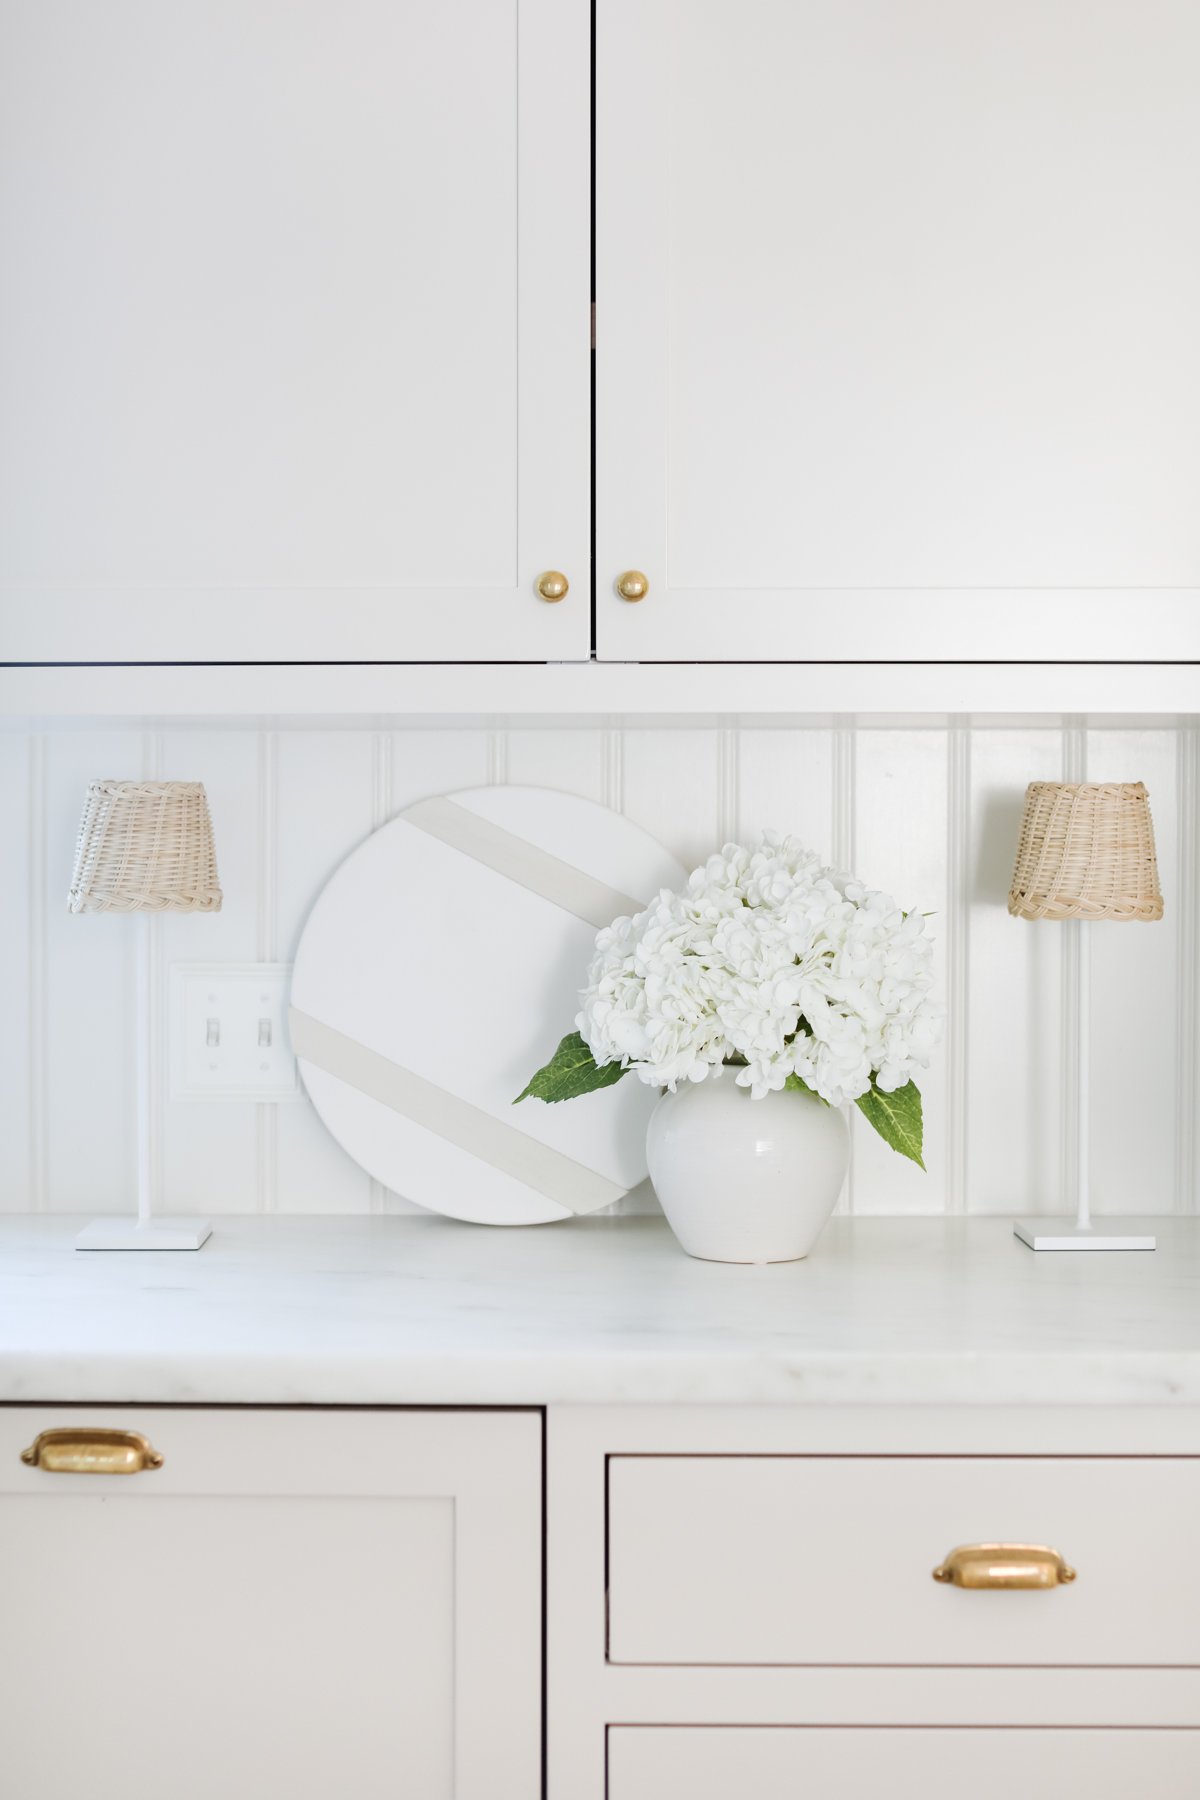 A classic white kitchen with white cabinets and a vase of flowers.